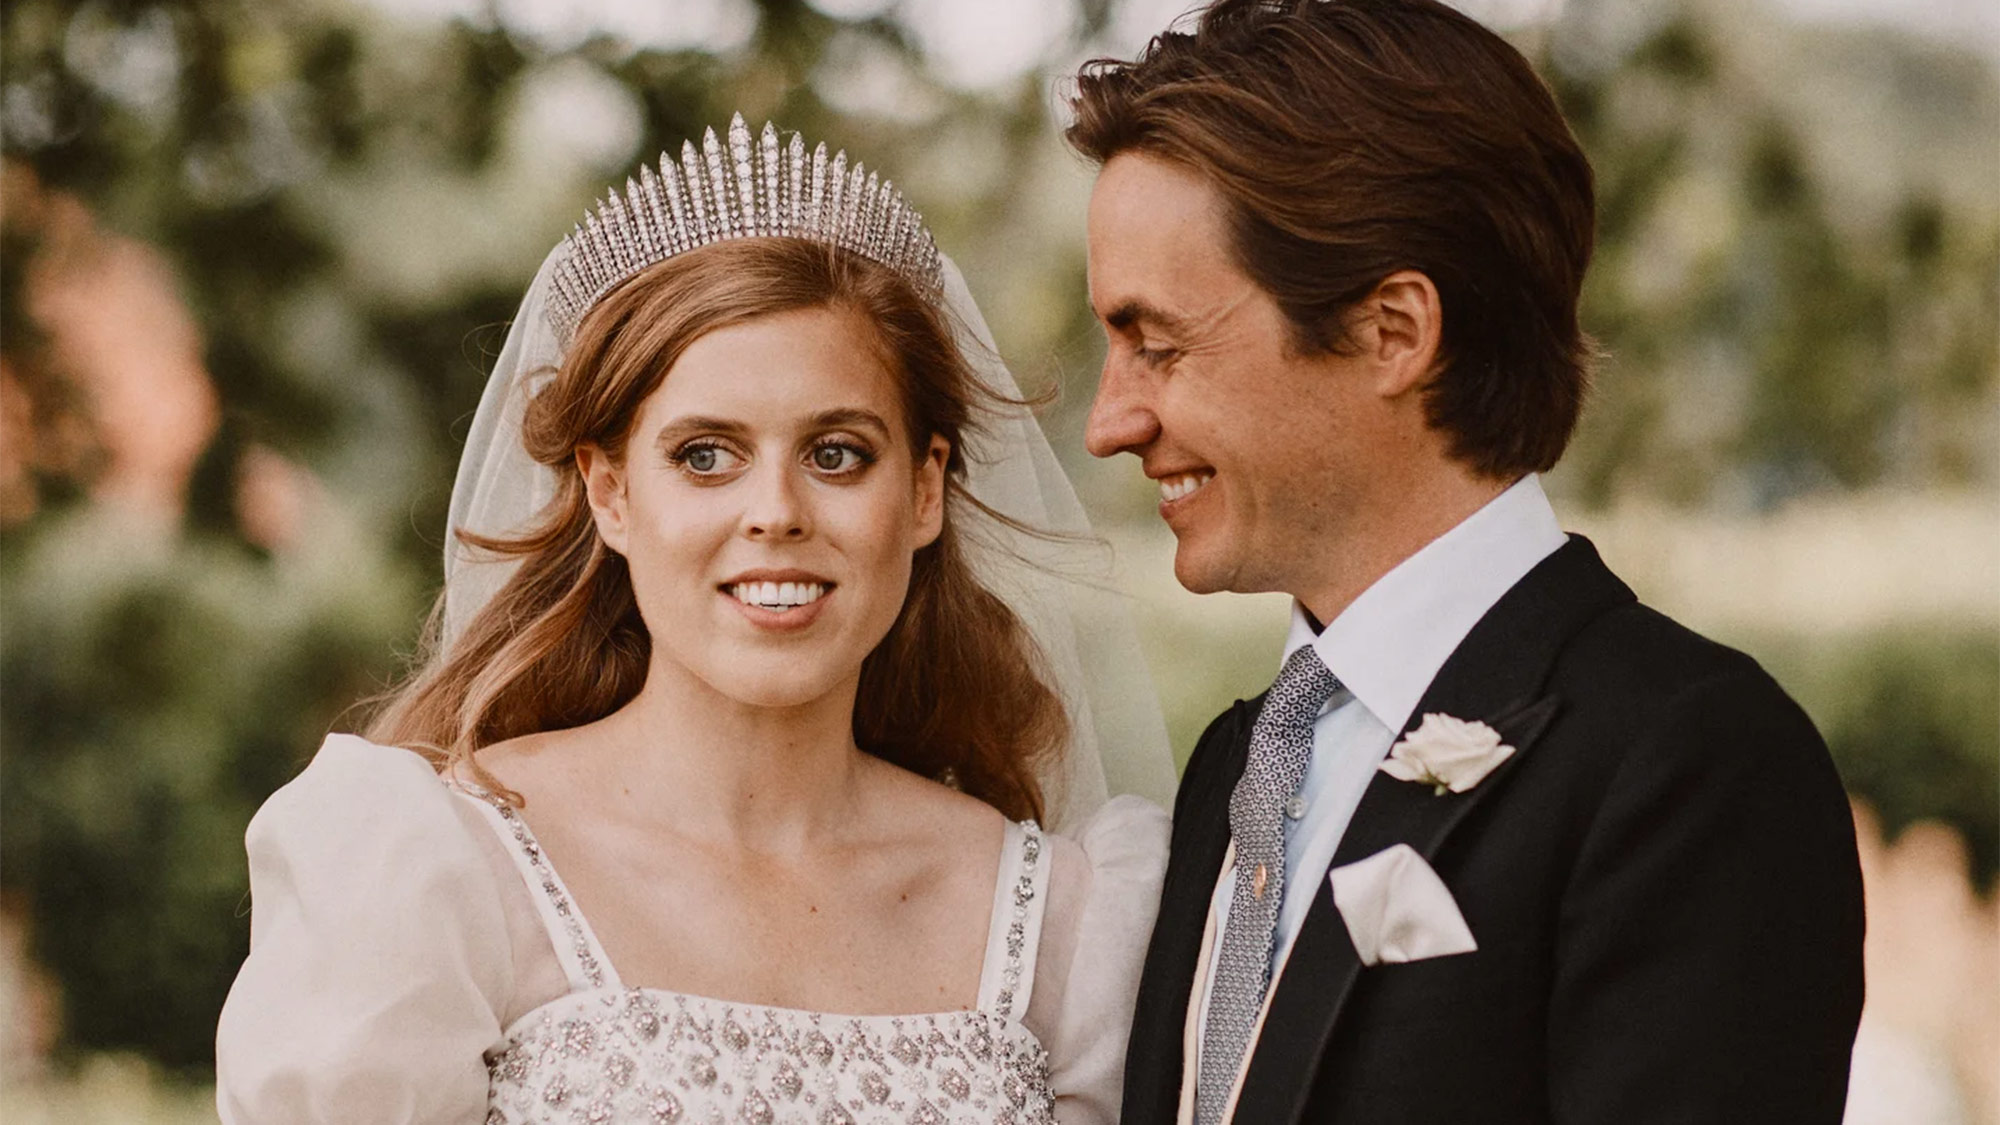 Princess Beatrice made a last minute request to borrow her wedding dress